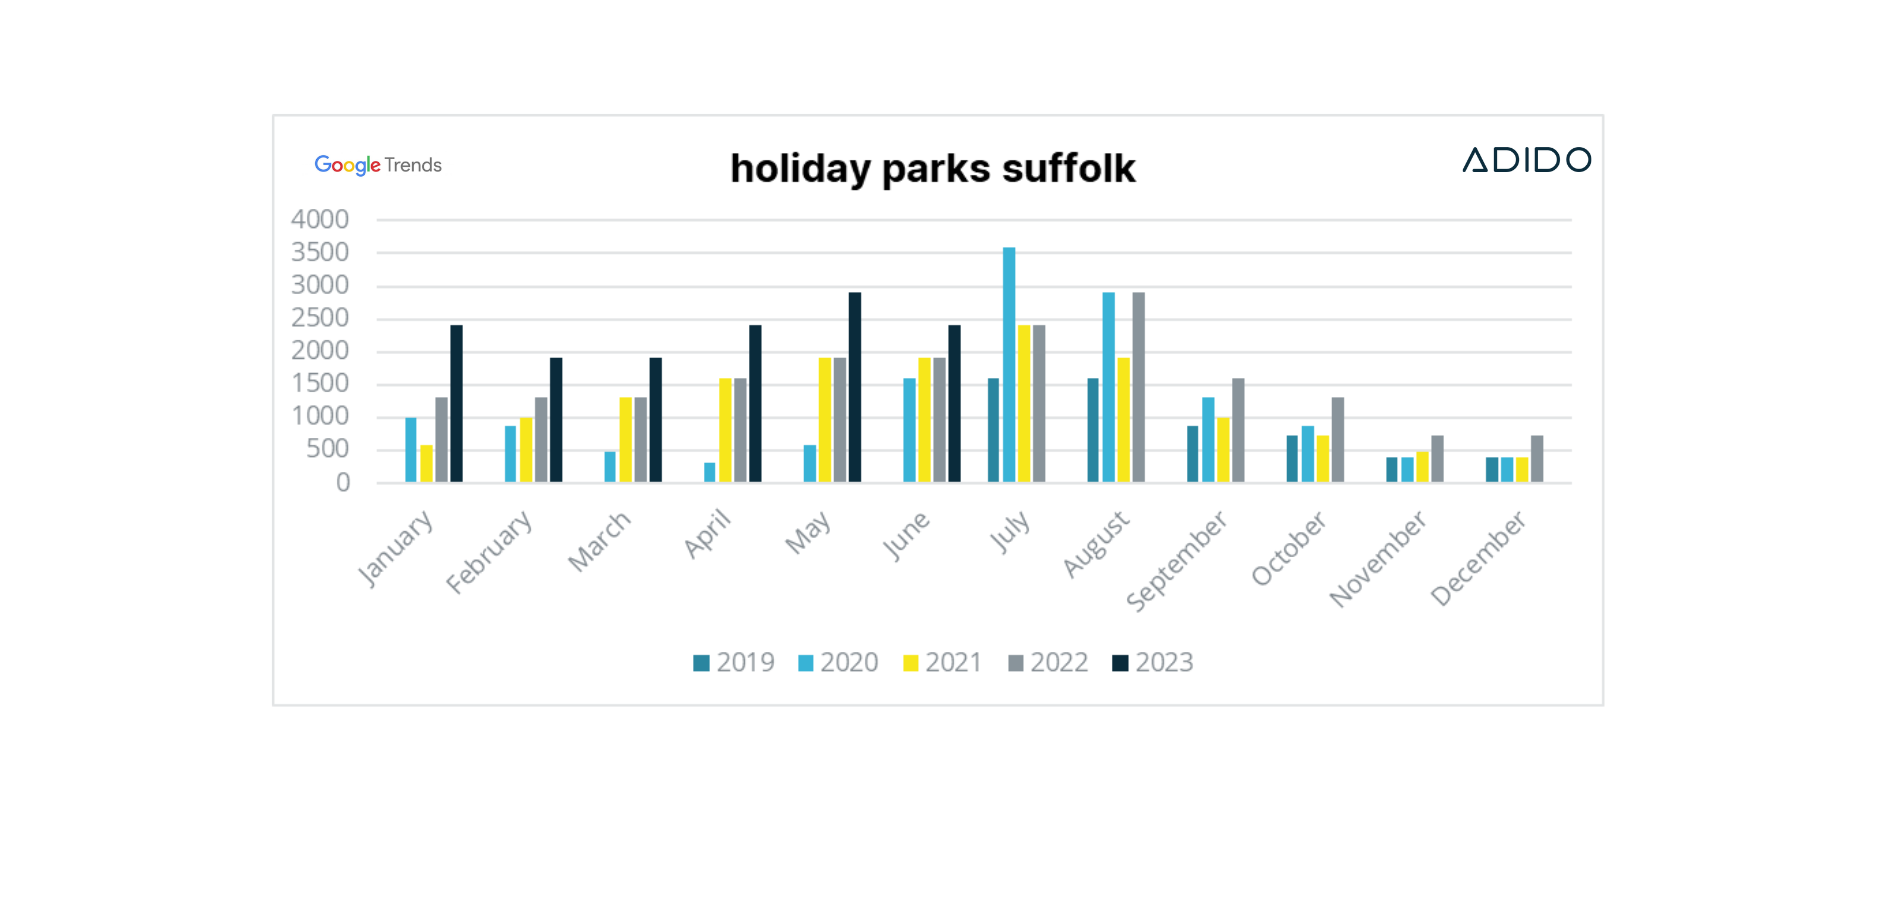 Holiday parks suffolk search trend 2019 2023